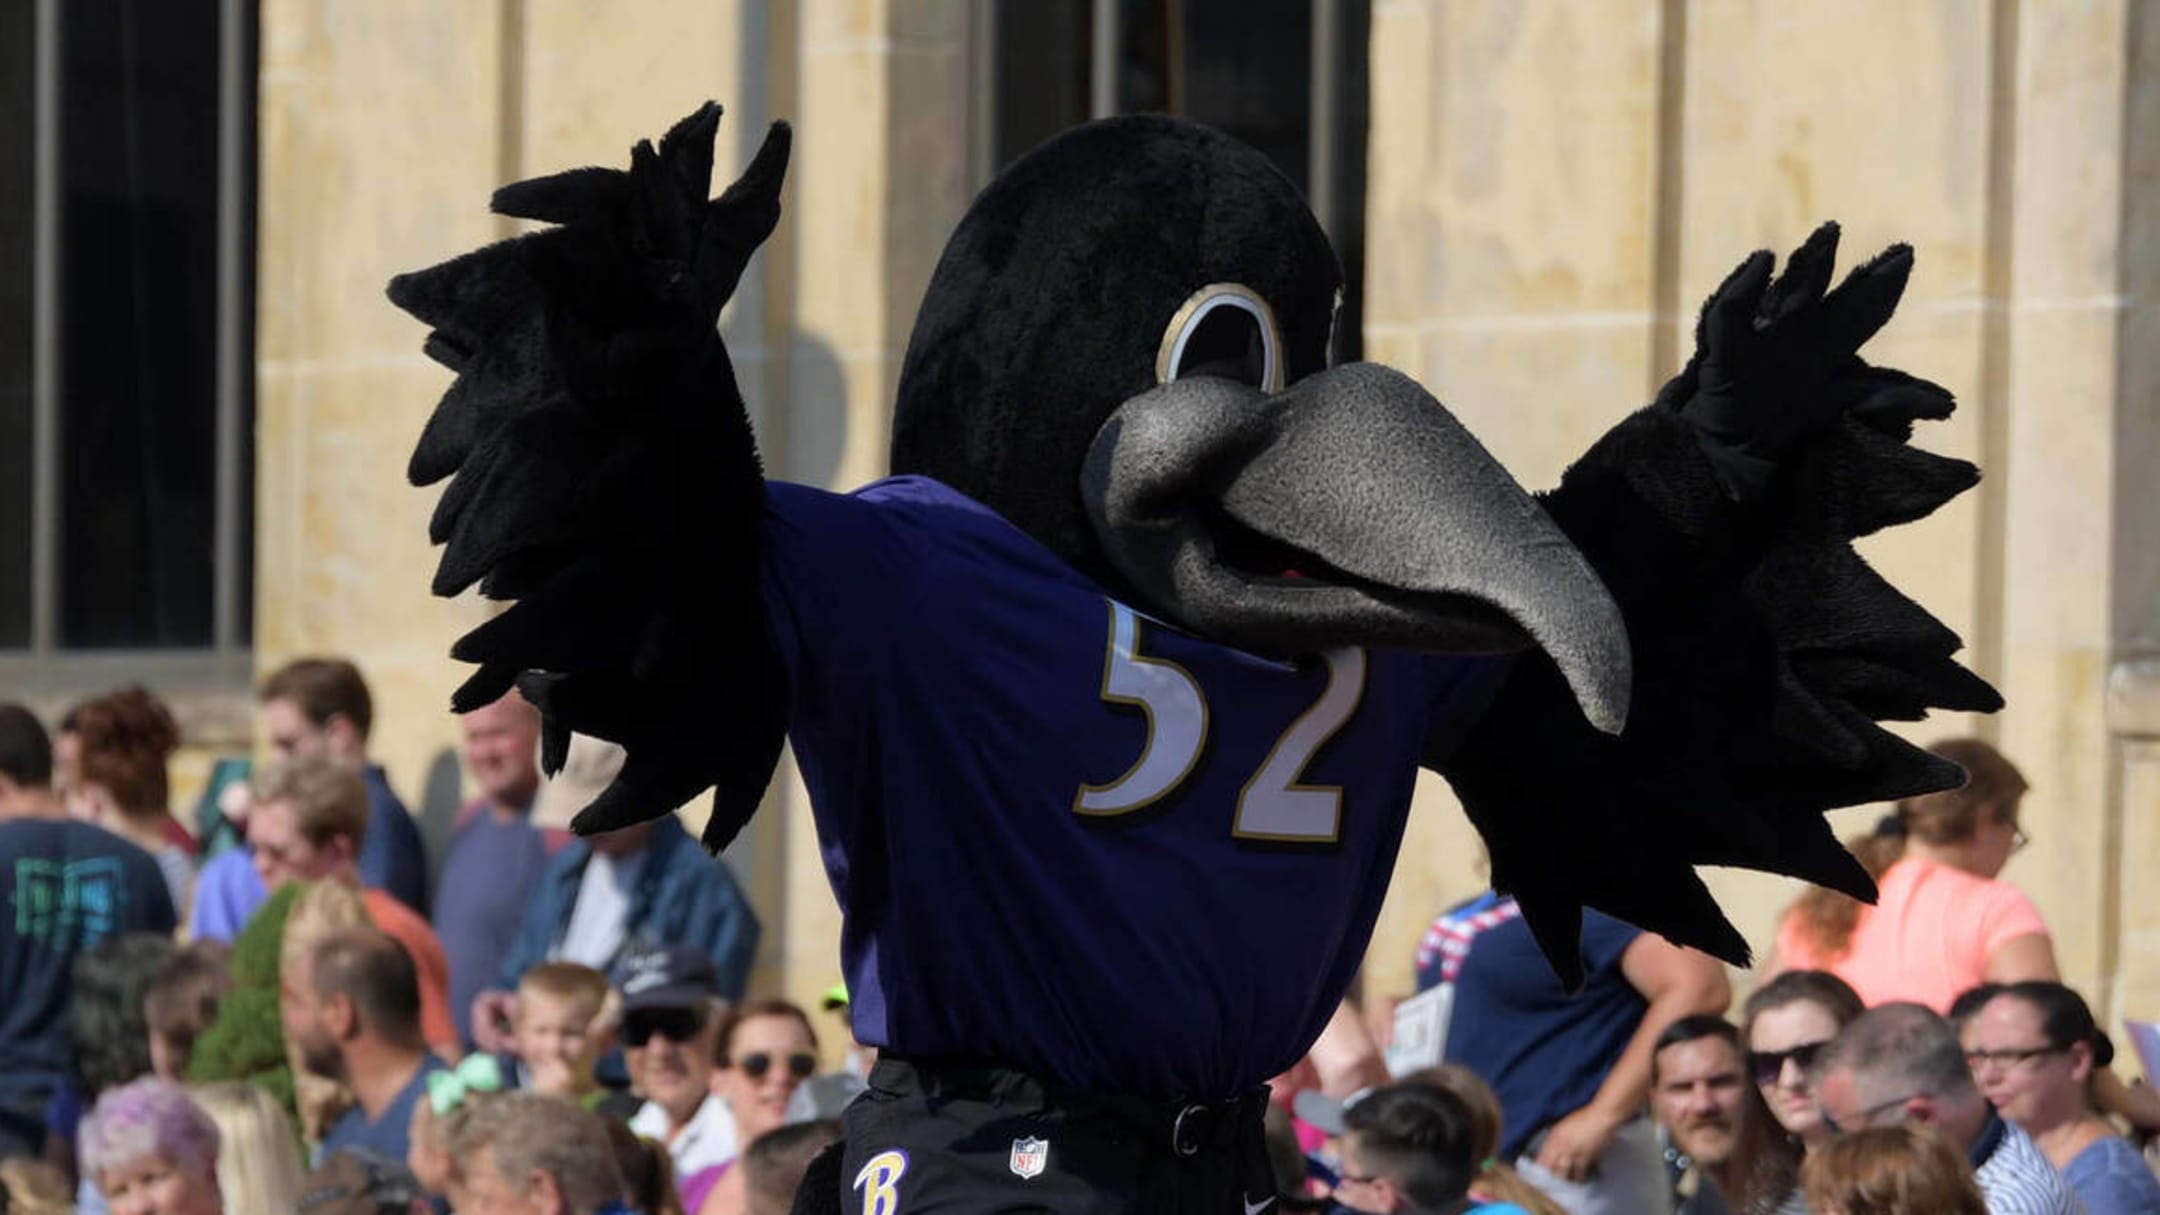 Baltimore Ravens mascot, Poe, carted off field after being injured